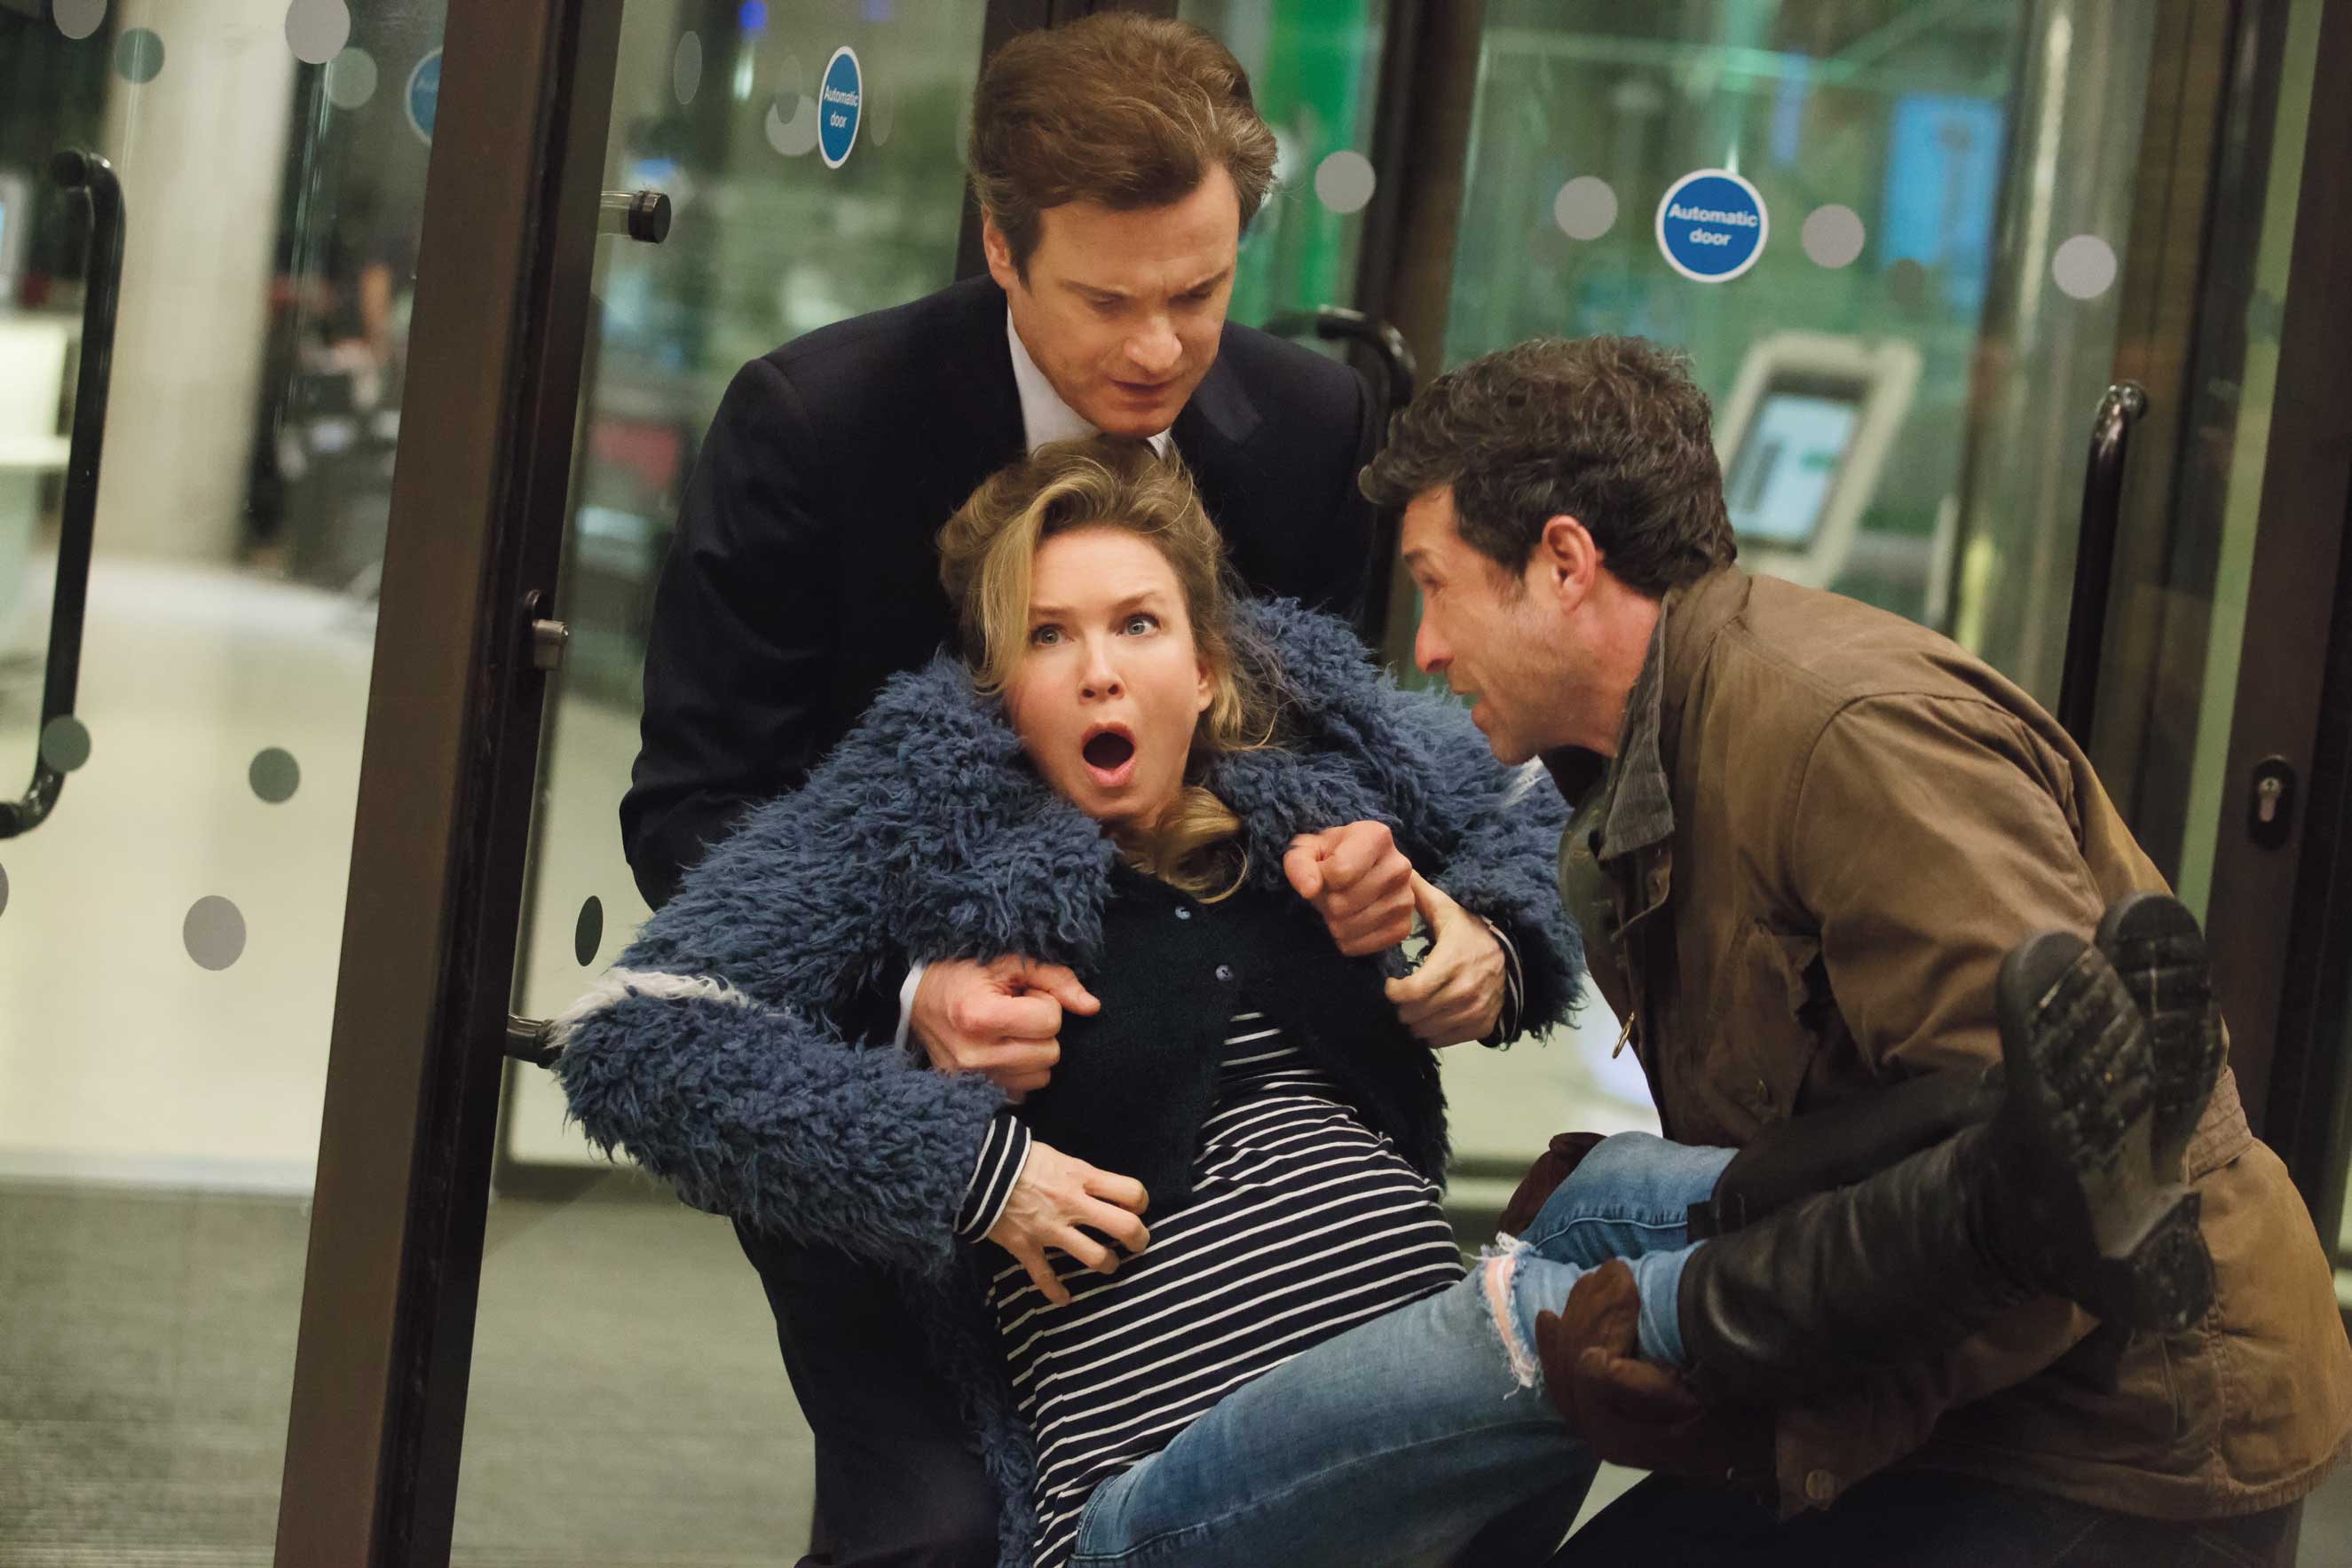 COLIN FIRTH and RENÉE ZELLWEGER who reprise their roles in the next chapter of the world’s favorite singleton are joined by PATRICK DEMPSEY in “Bridget Jones’s Baby.” (Giles Keyte—Universal)